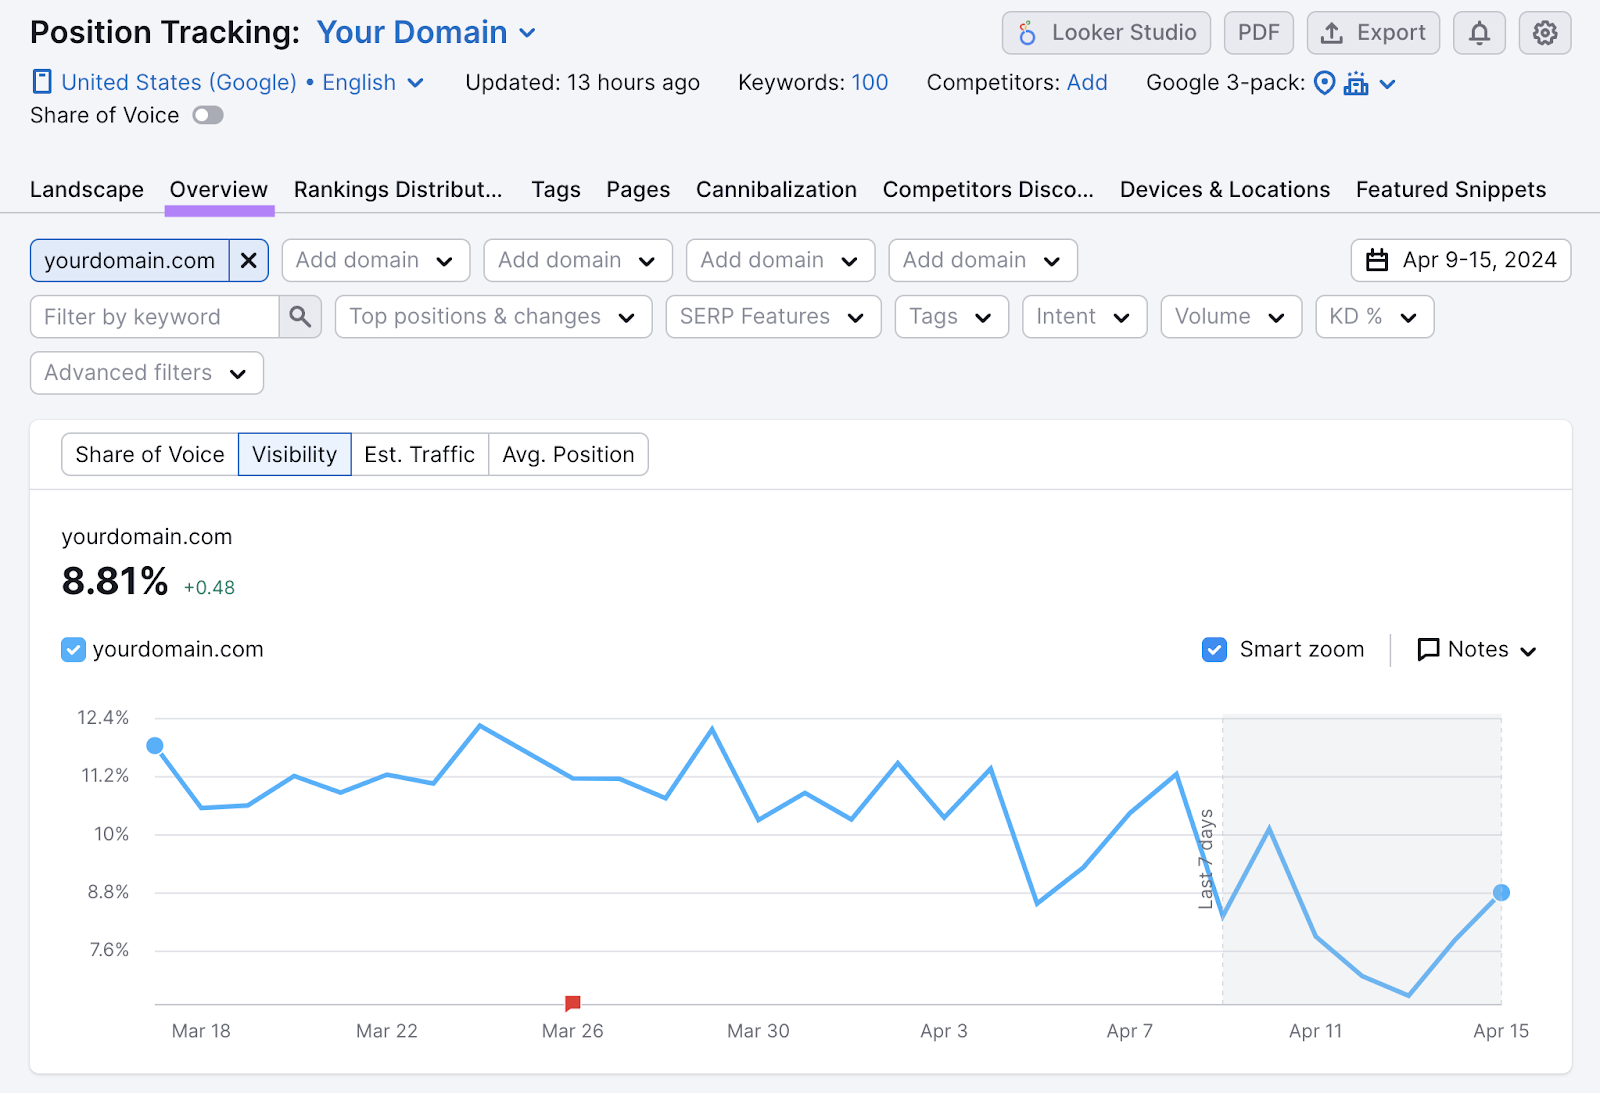 Domain's visibility graph shows downward trend